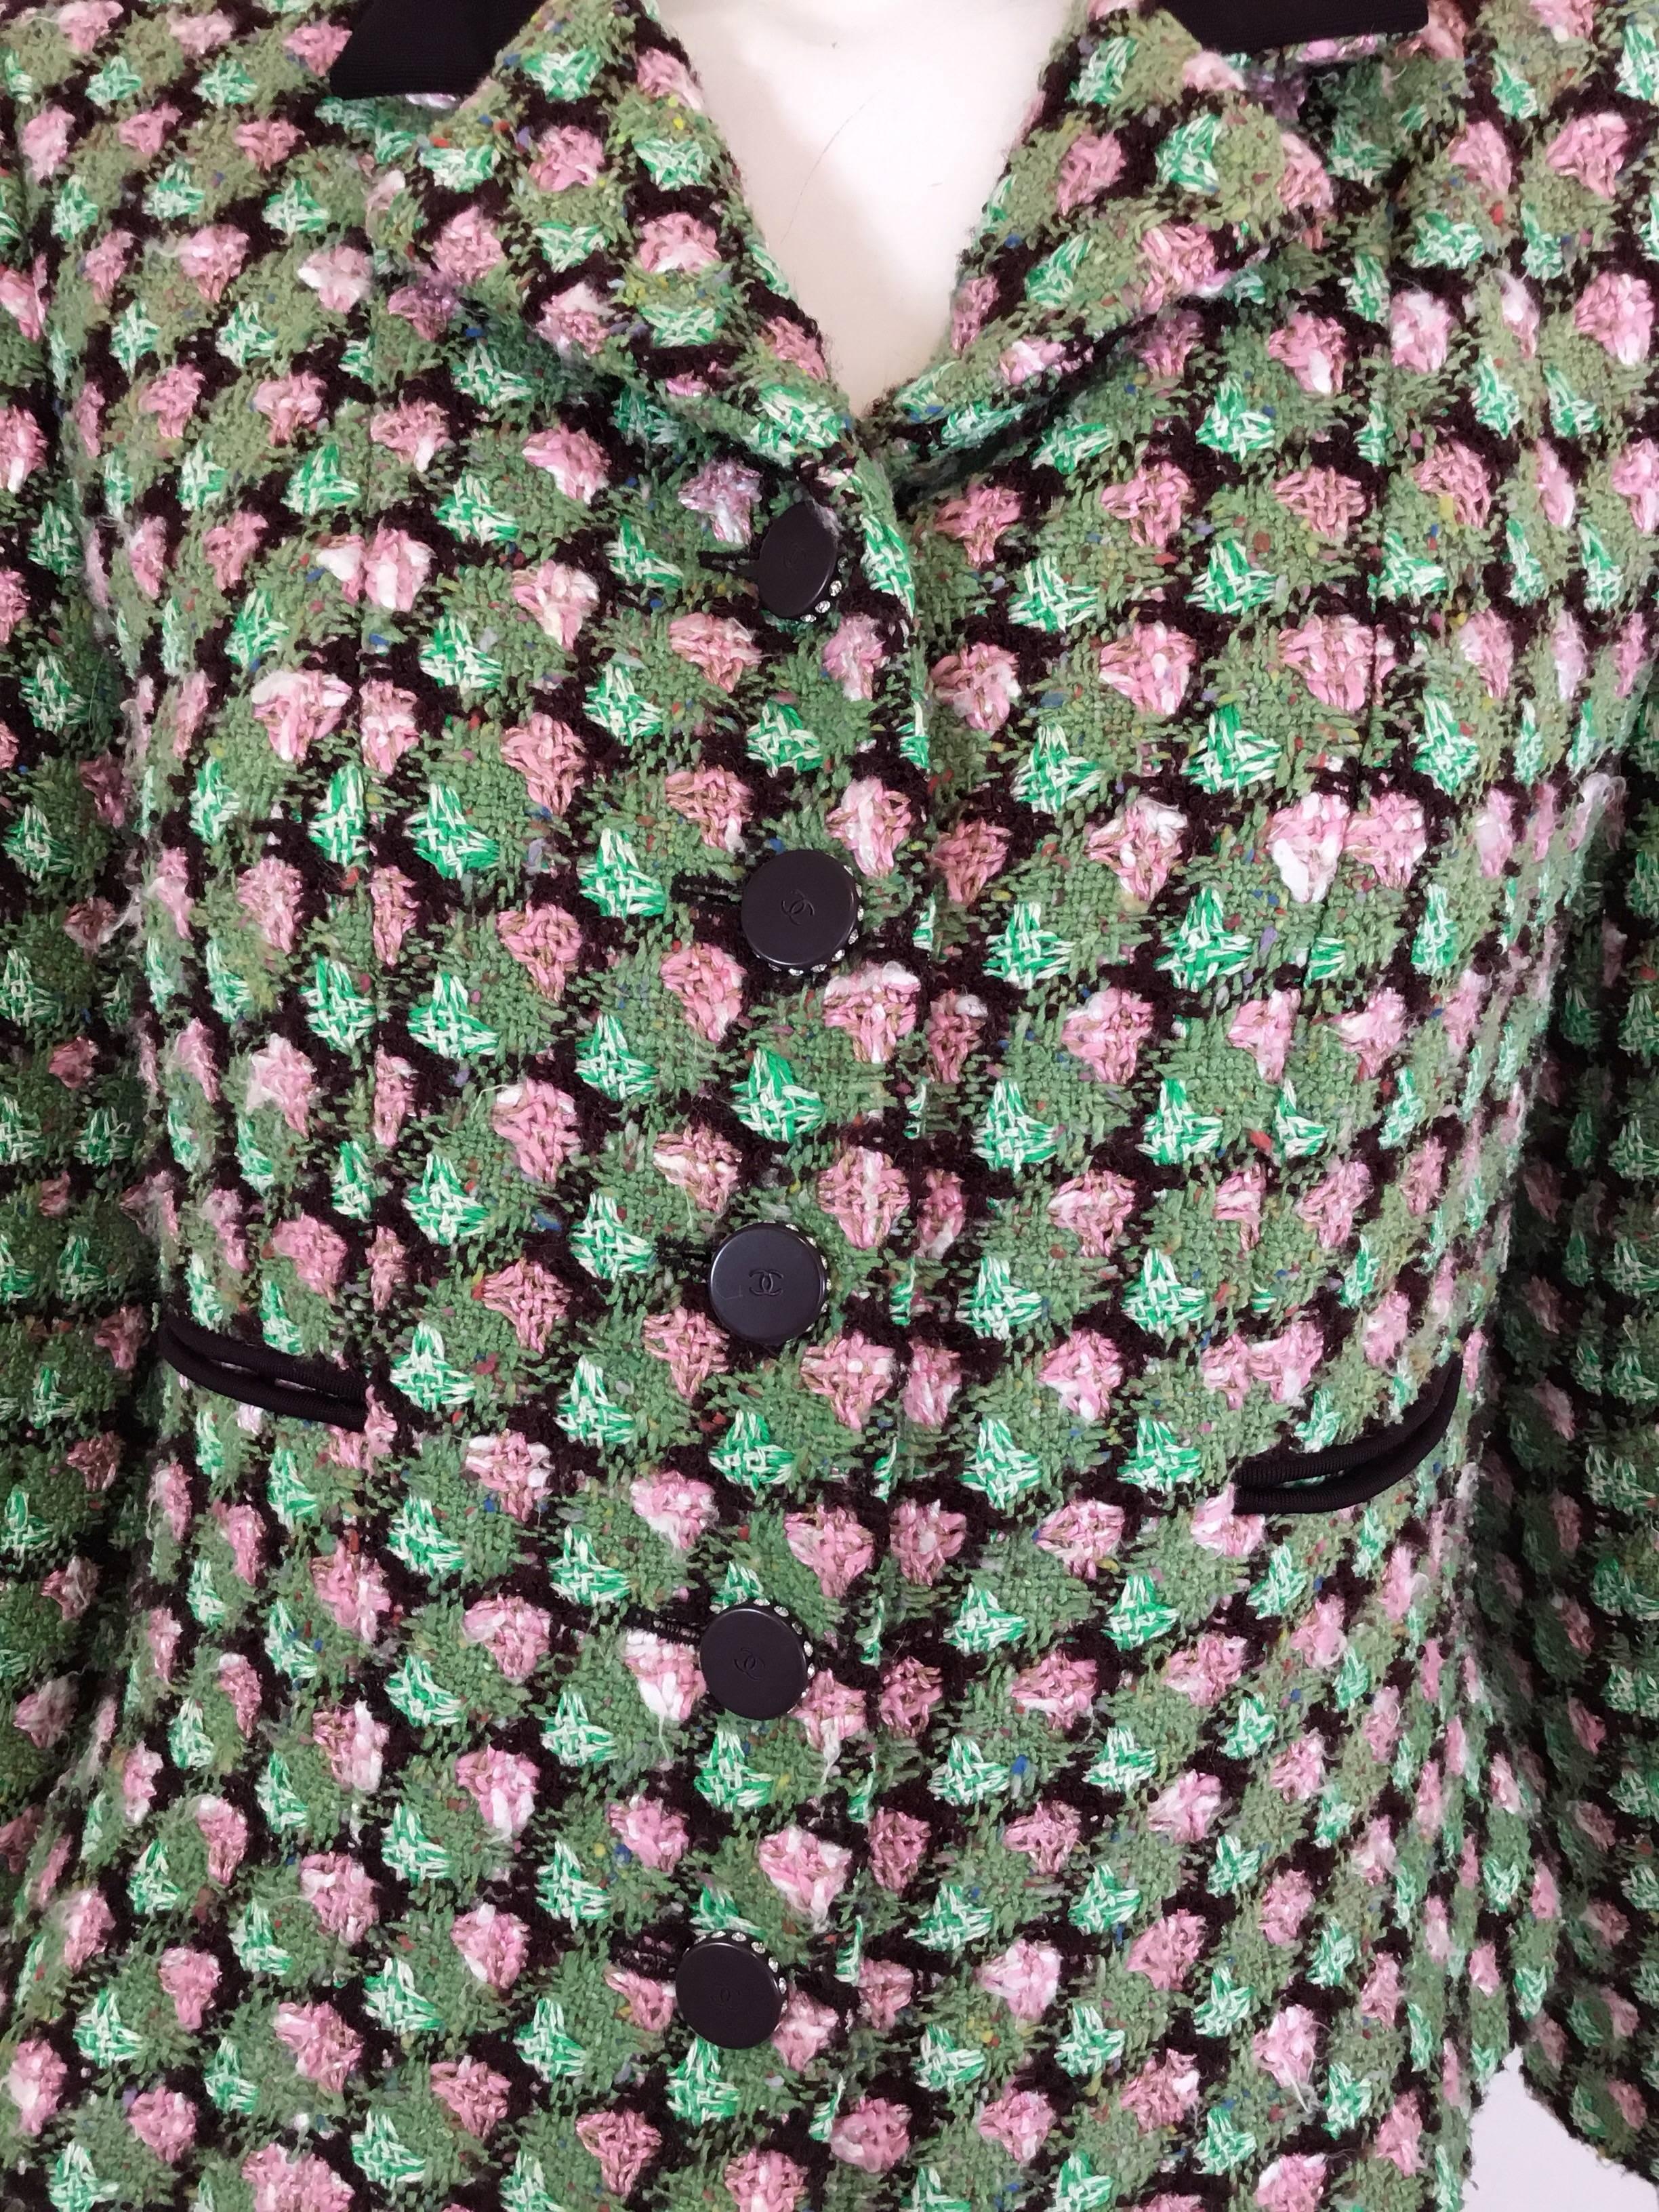 Chanel tweed jacket featured in green with an eggplant-colored collar, rhinestone encrusted button closures along the front and on the cuffs. Jacket has two uncut slip pockets at the waist and a full lining with a chain along the hem. Labeled size